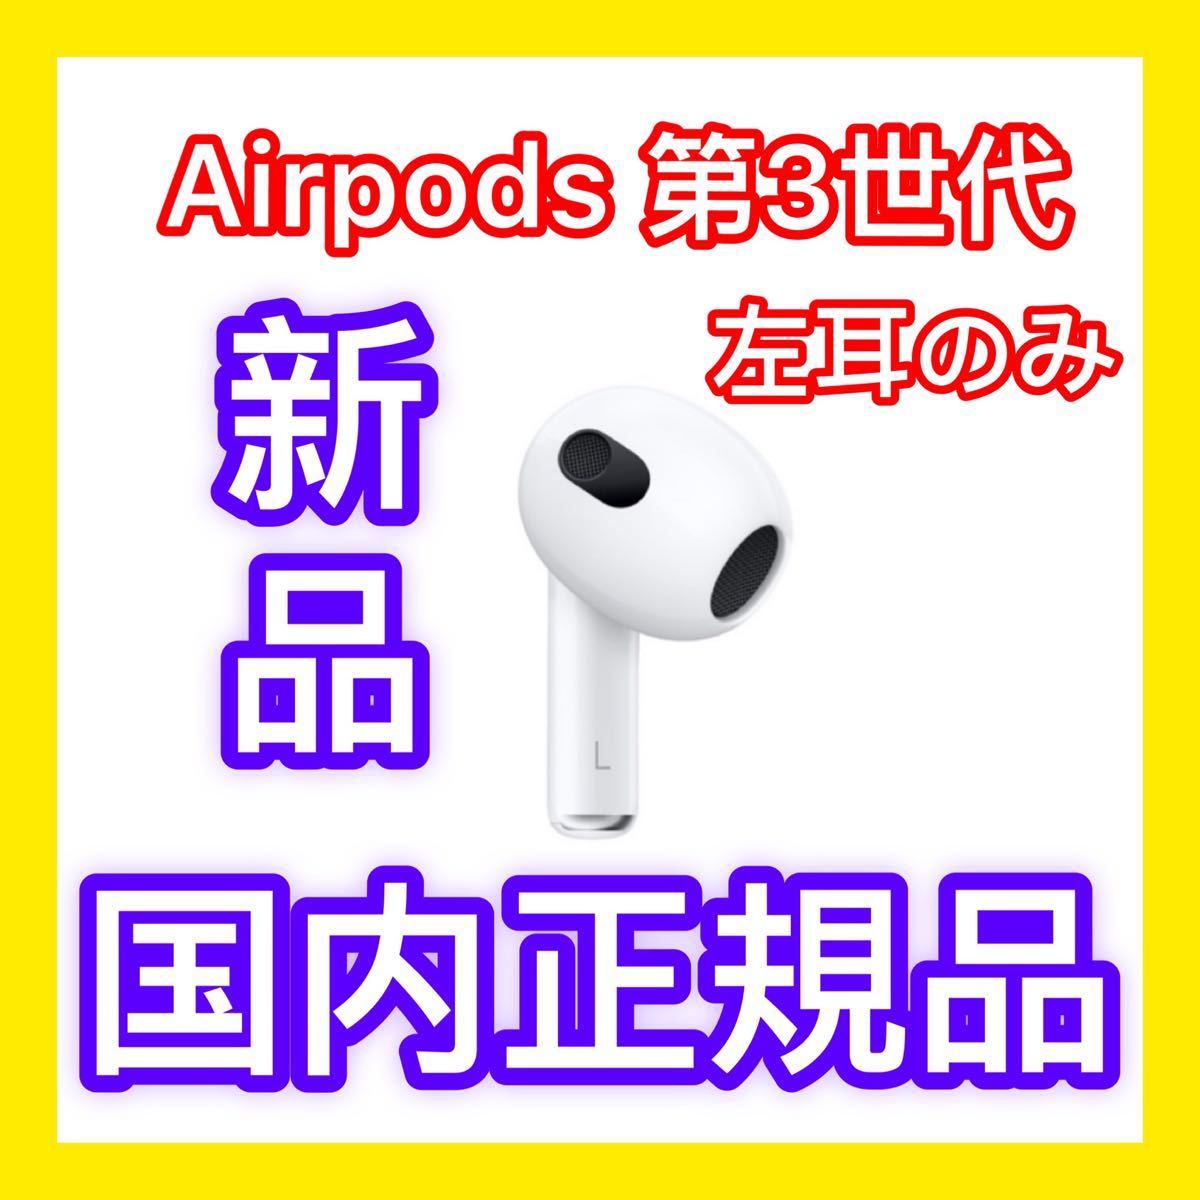 5％OFF】 新品 AirPods Pro 左耳のみ 片耳